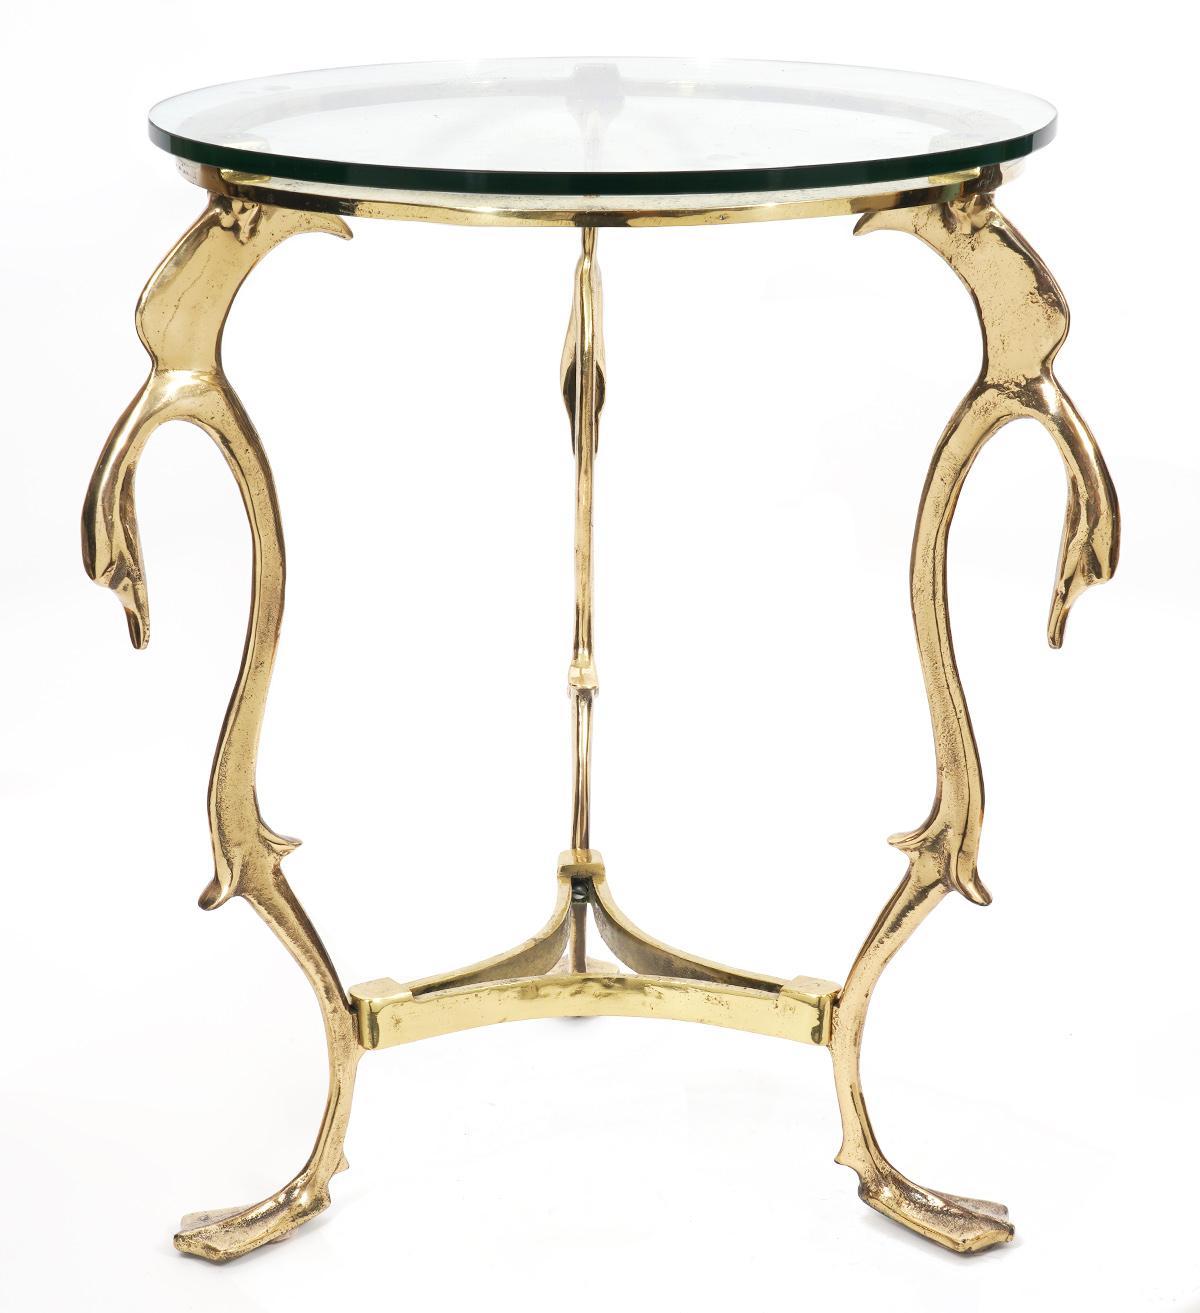 Of elegant almost organic form reminiscent of rococo style these French hammered bronze gueridon side tables feature three shaped and curved legs with swan heads and webbed swan feet supporting thick tempered glass tops.